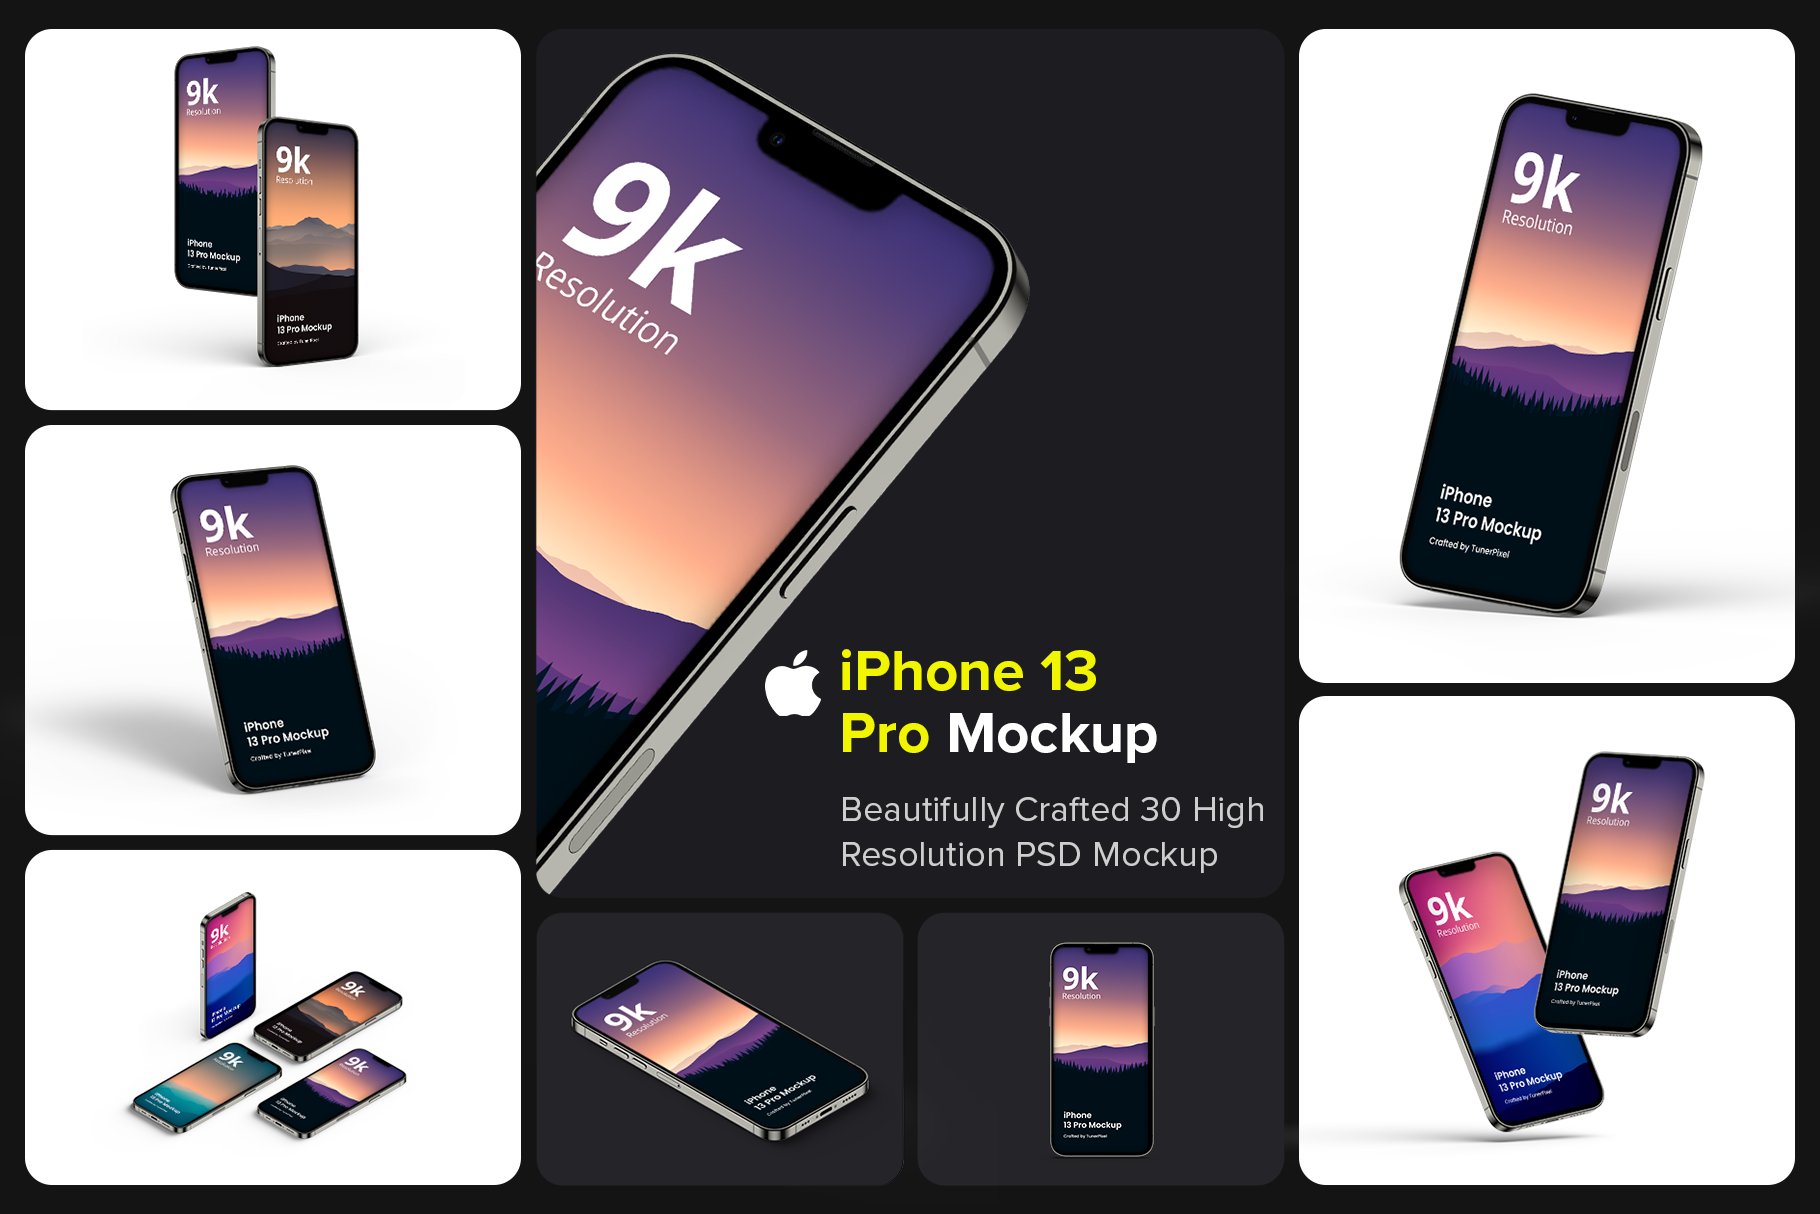 iPhone 13 Pro Mockup cover image.